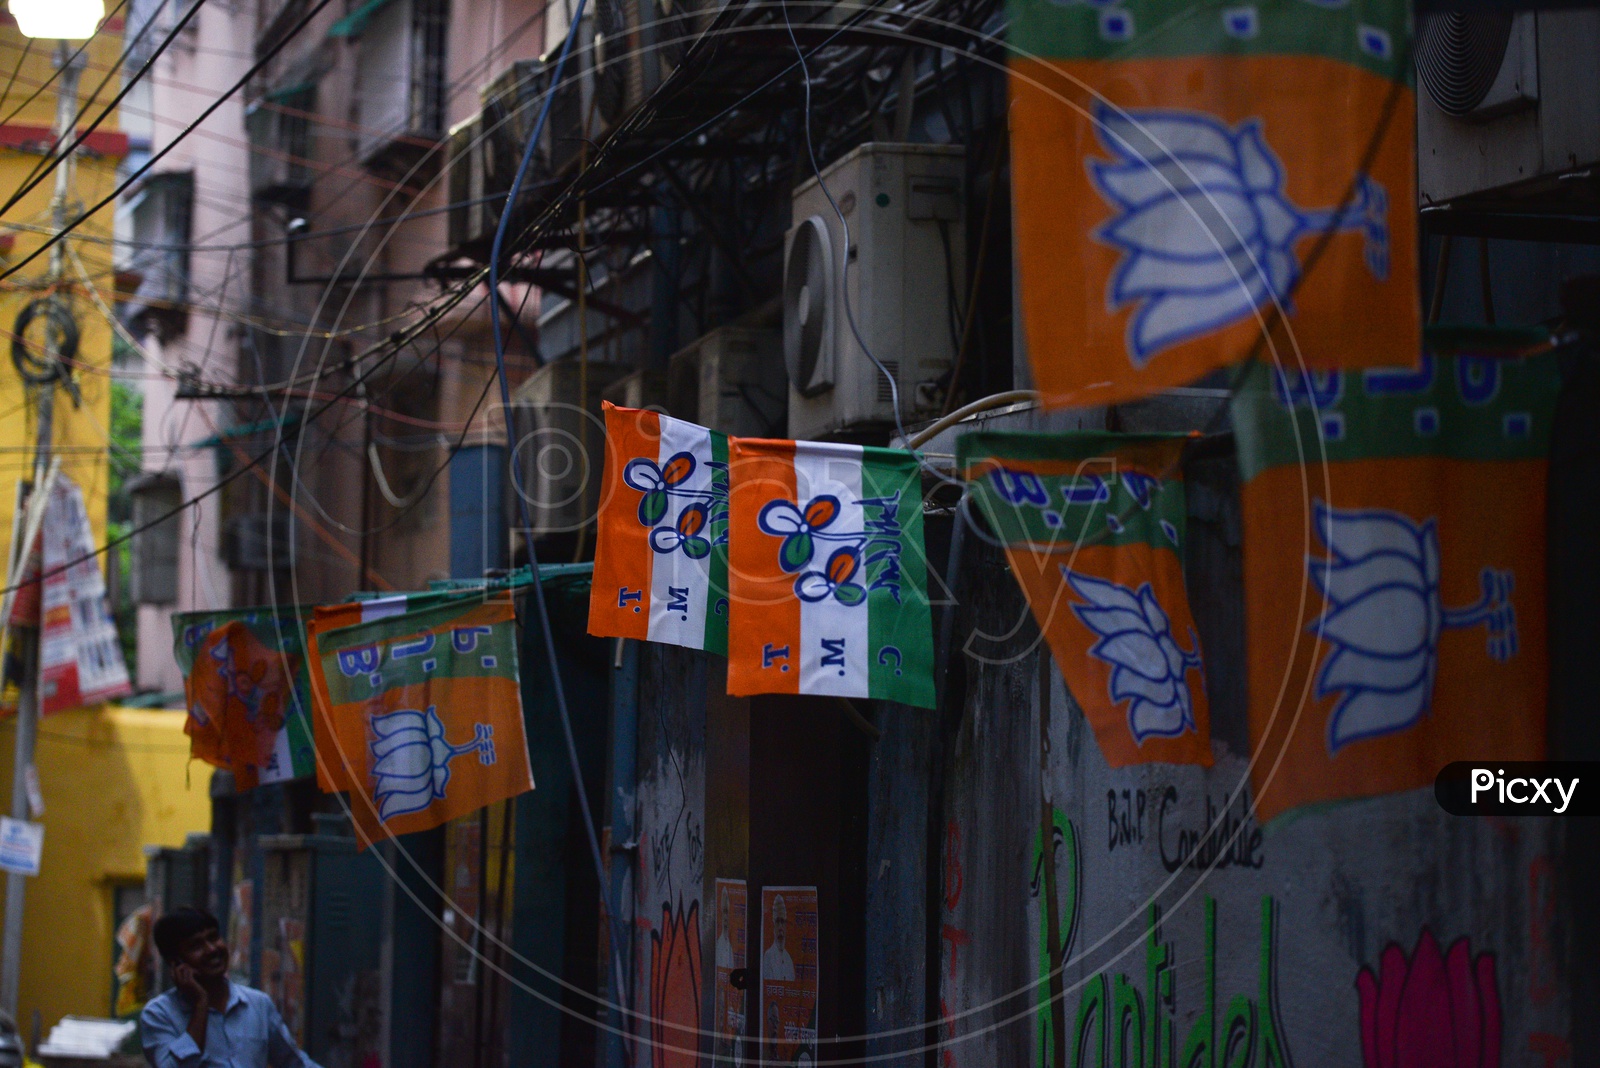 Bharatiya Janata Party and Trinamool Congress Party Flags displayed all over Kolkata City ahead of the Lok Sabha Elections in the state of West Bengal.